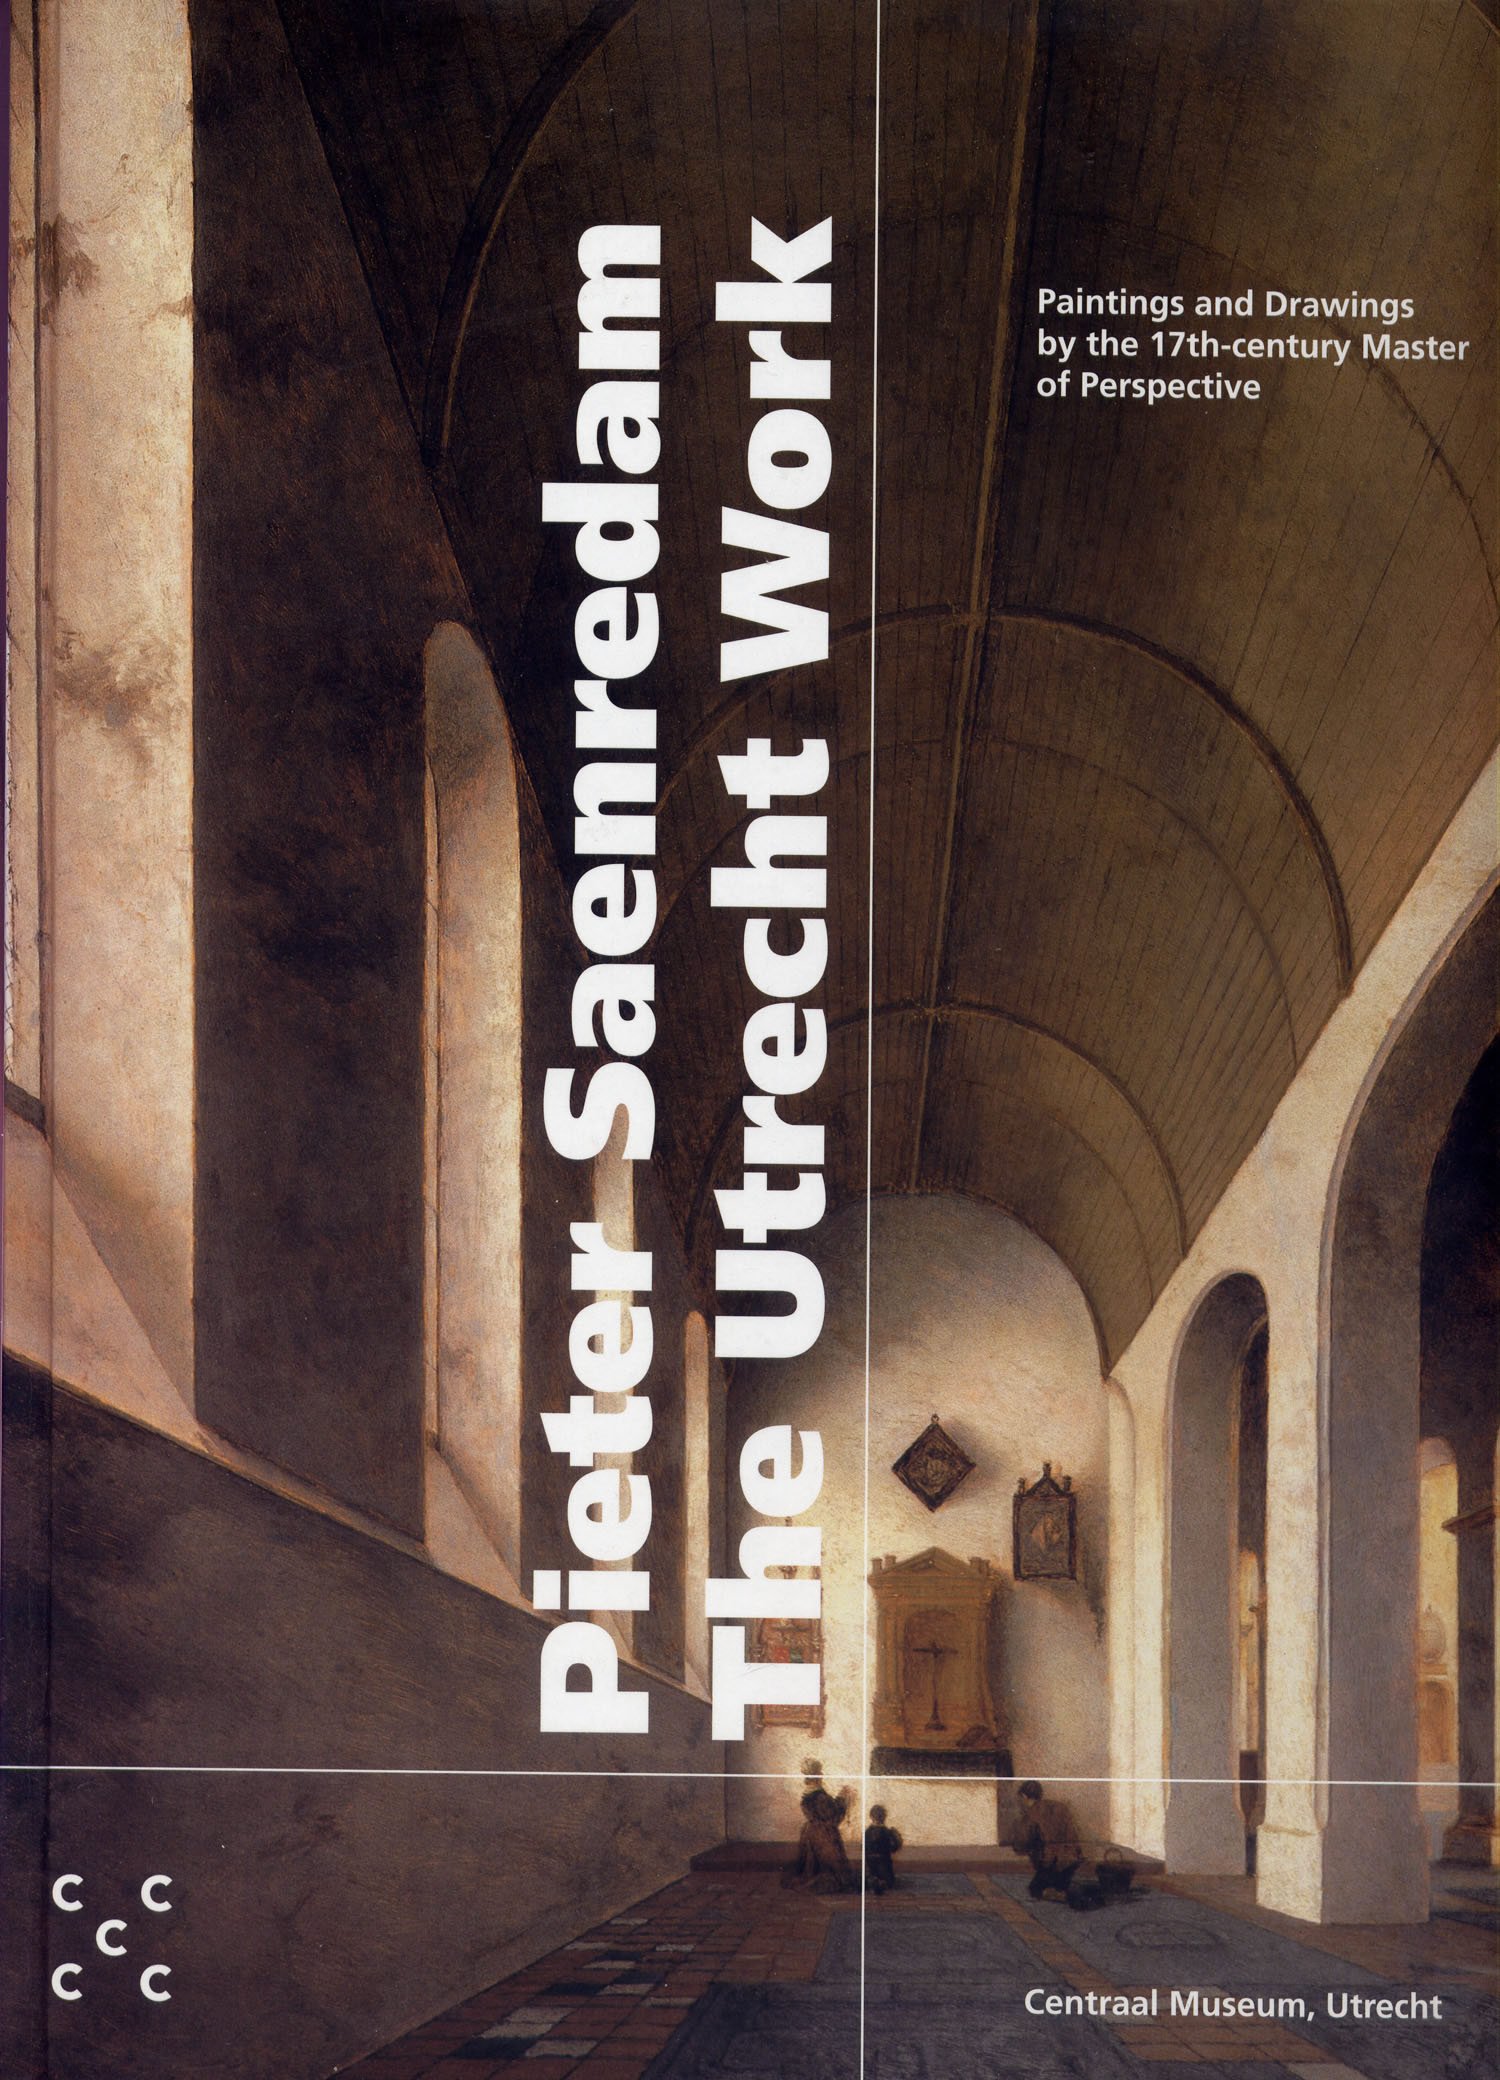 Wim Crouwel: Pieter Saenredam. The Utrecht Work. Paintings and Drawings by the 17ht-century Master of Perspective. 2000